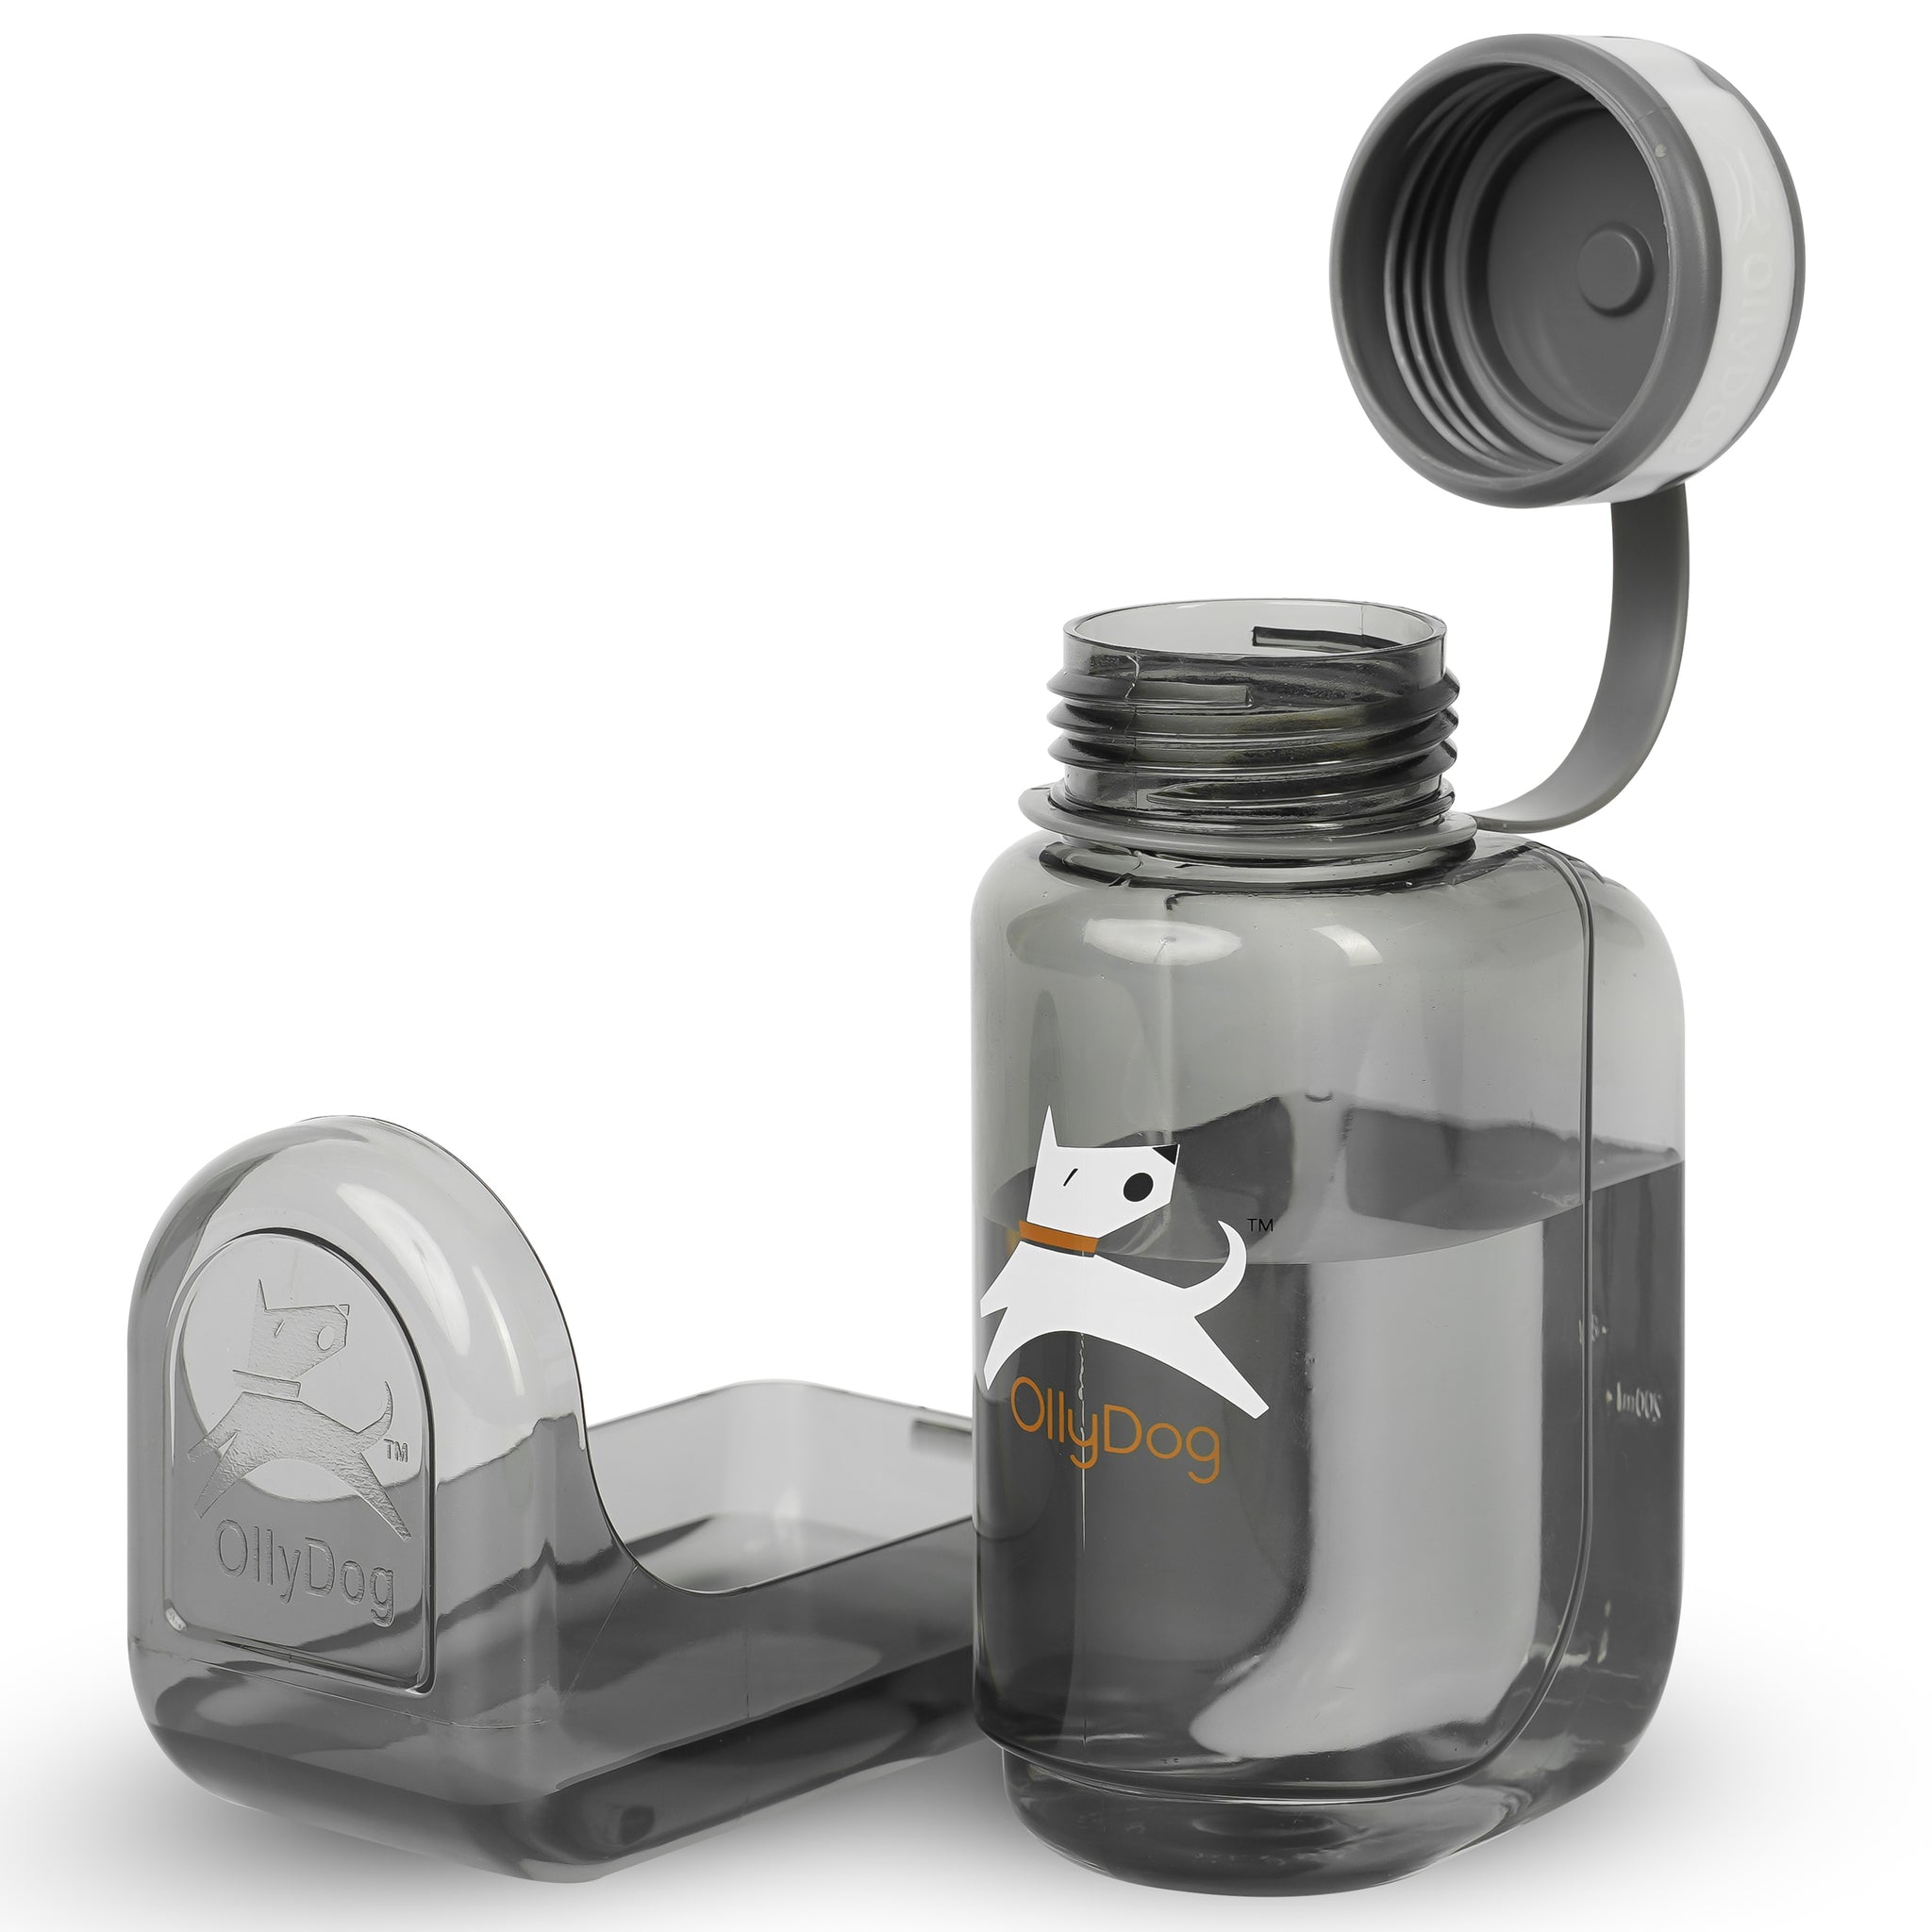 OllyBottle in Grey- Save 20% at Checkout